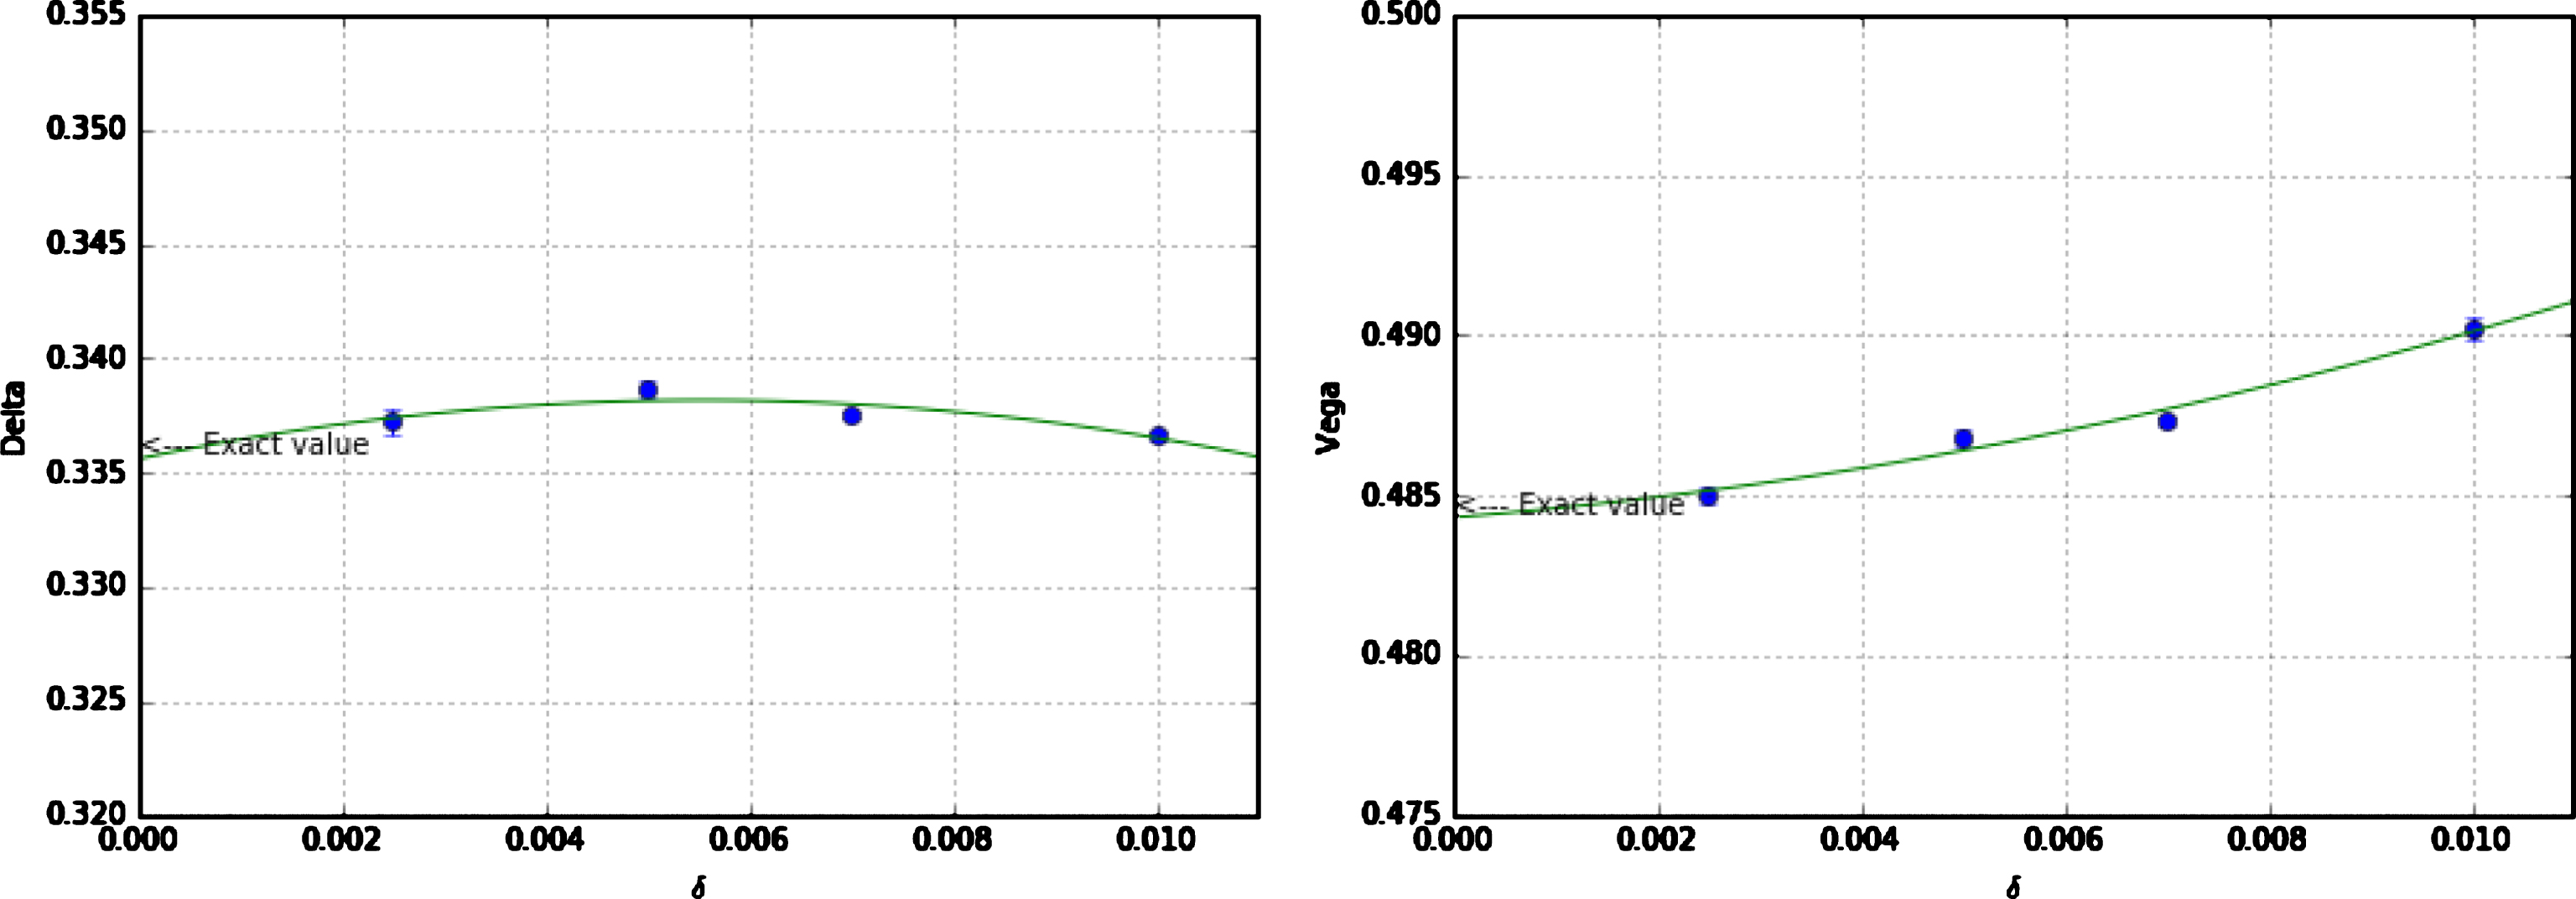 AAD Delta (left panel) and Vega (right panel) of the Bermudan-style option in (80) for K = 1 vs the smoothening parameter δ for the call spread regularization (48). The number of simulated paths is 3,000,000 for δ = 0.01 and is increased as δ is decreased in order to keep statistical uncertainties roughly constant. The results are obtained with the setting (81) and (82). The values in the graphs are fitted based on a quadratic polynomial function (green lines).